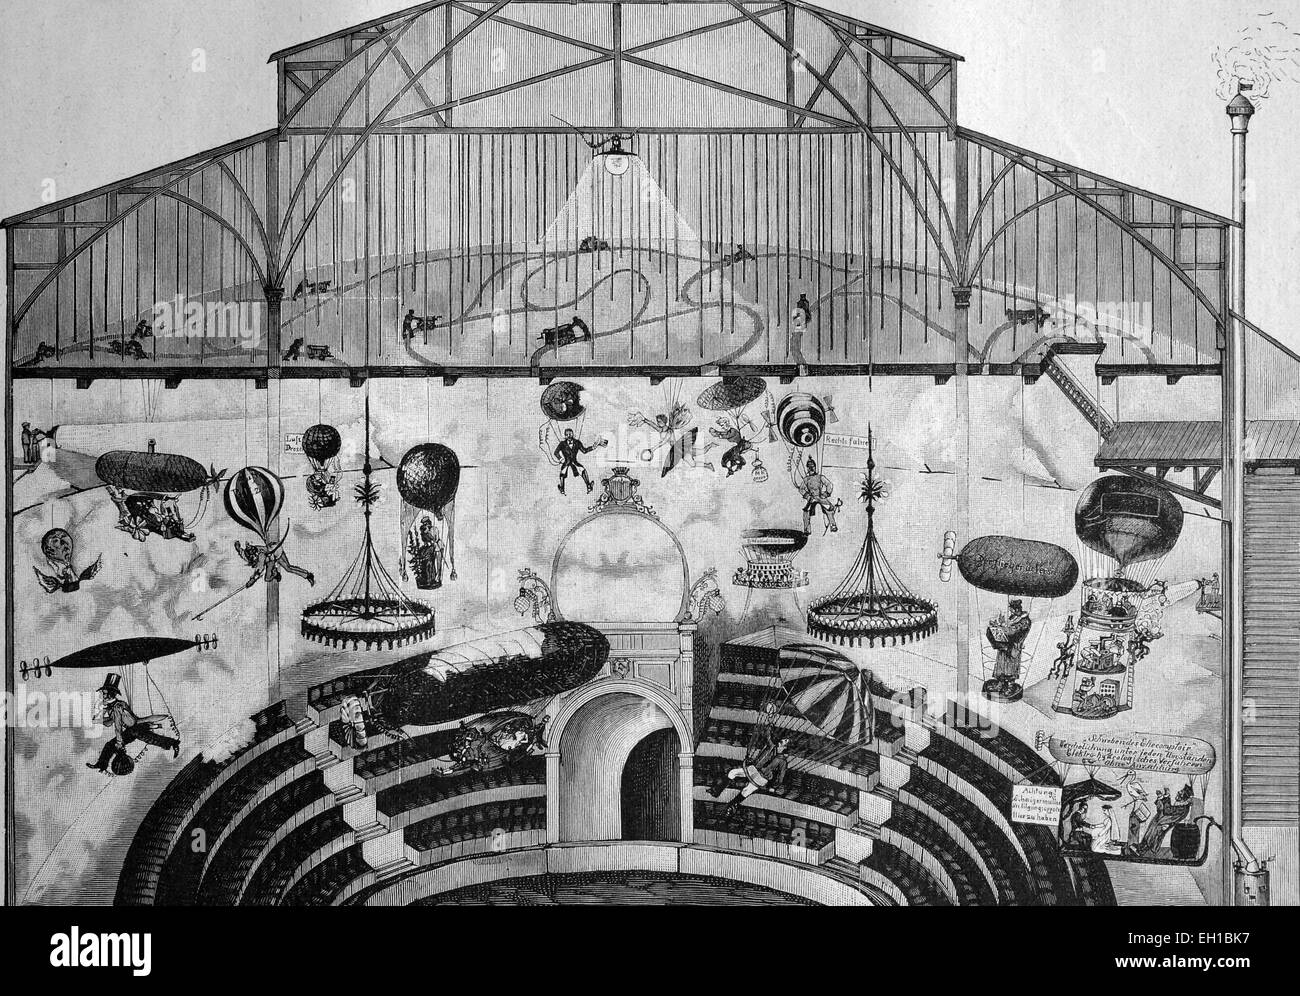 Cloud Pantomime at the Circus Busch, Berlin, Germany, historical picture circa 1881 Stock Photo